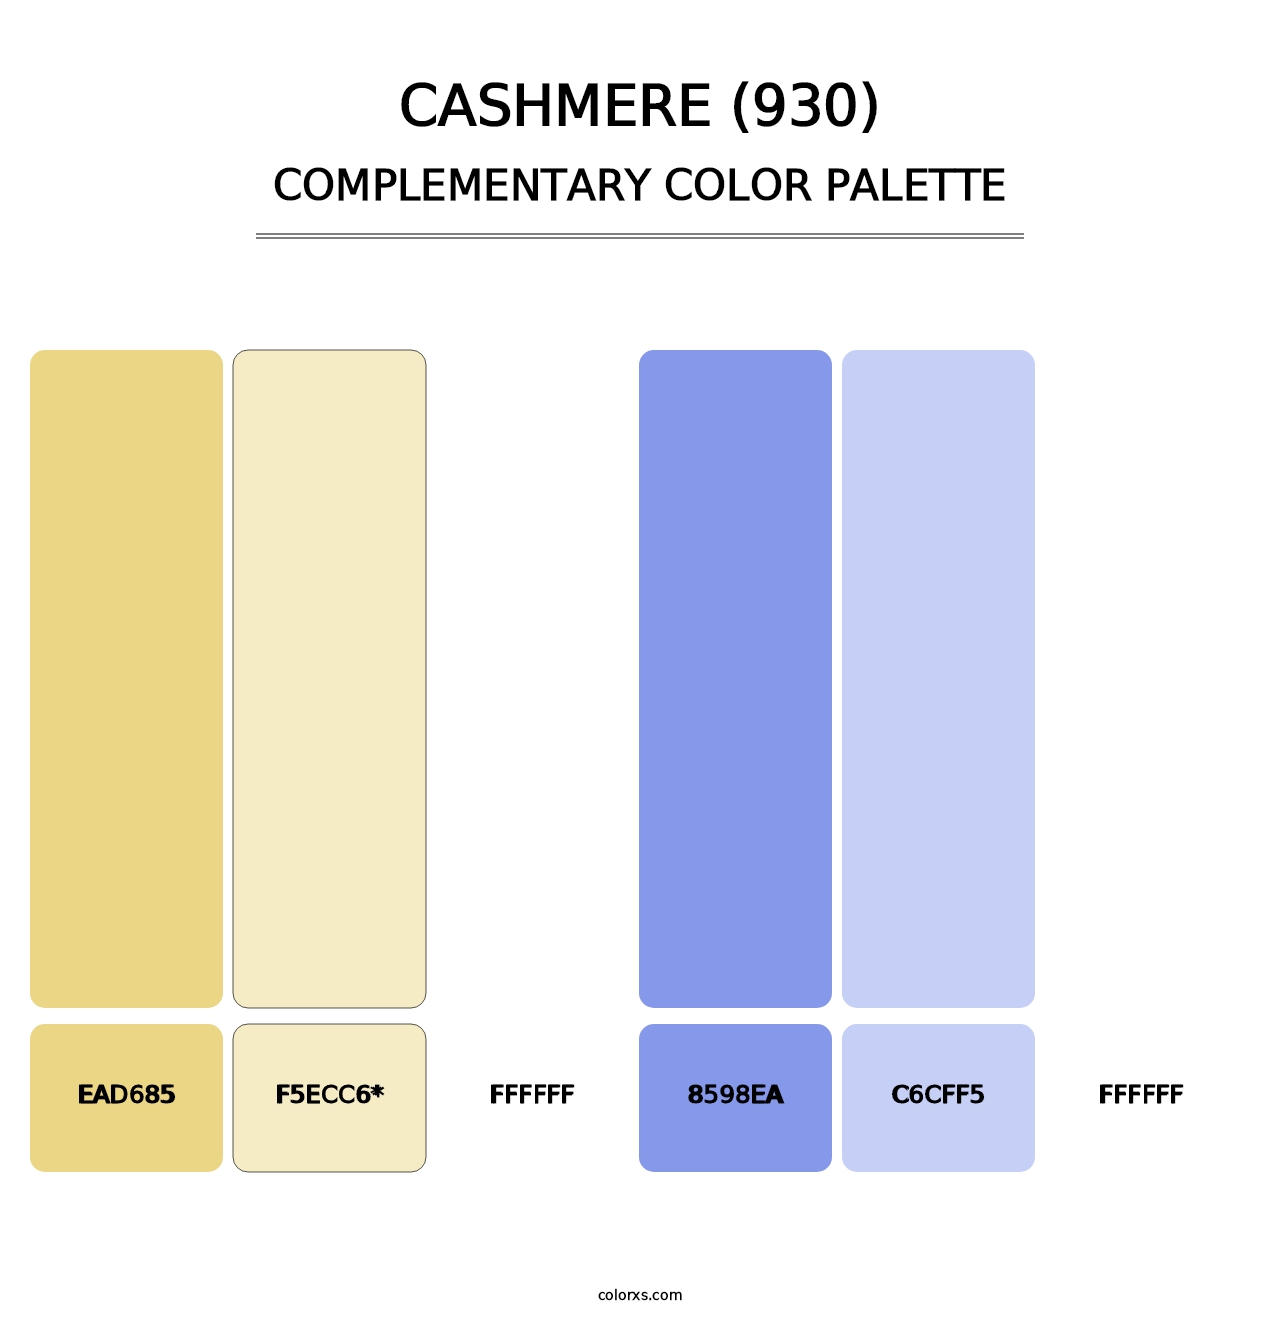 Cashmere (930) - Complementary Color Palette